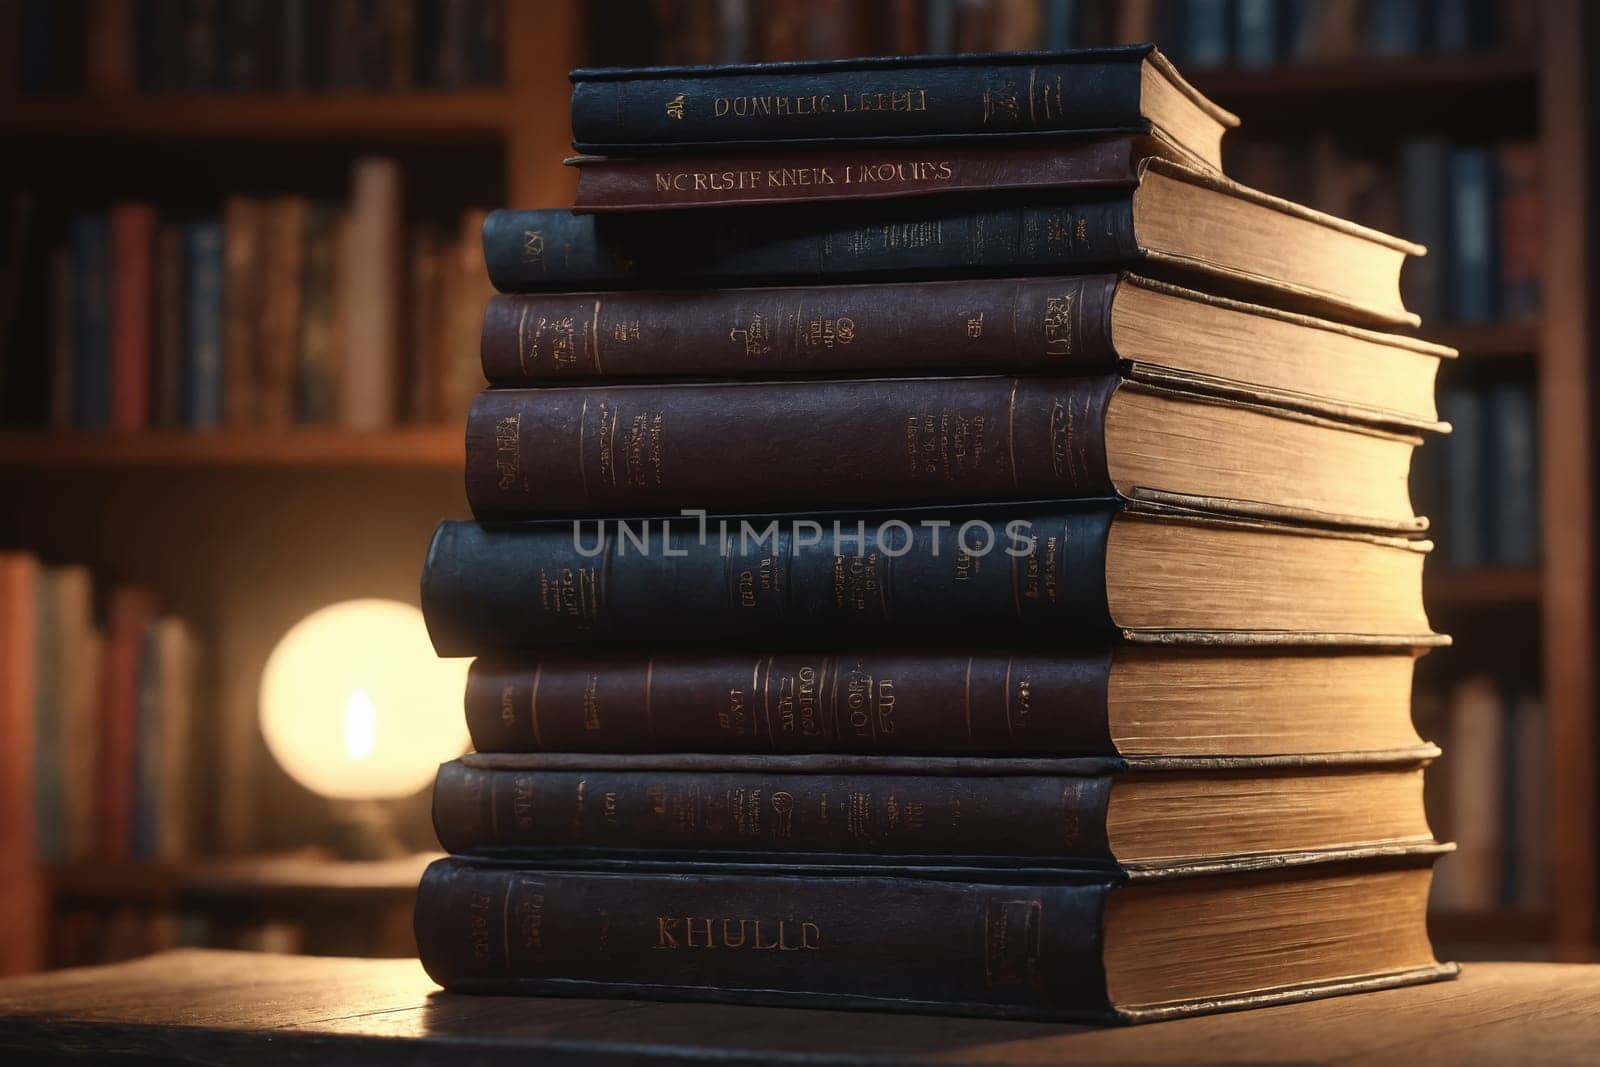 A warm glow envelops a stack of hardcover books, their blue and brown hues inviting a closer look in a cozy setting.